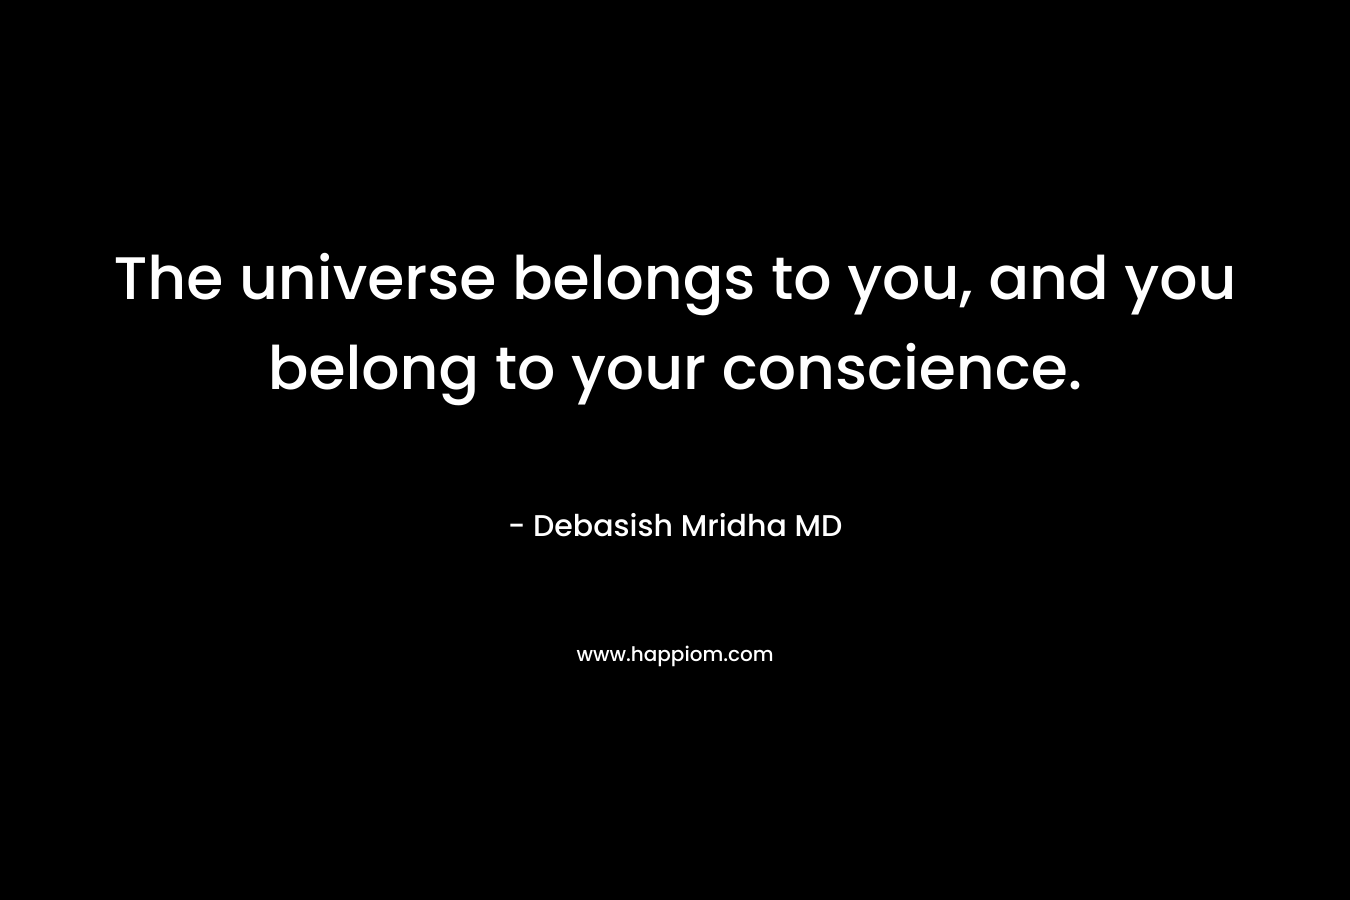 The universe belongs to you, and you belong to your conscience.